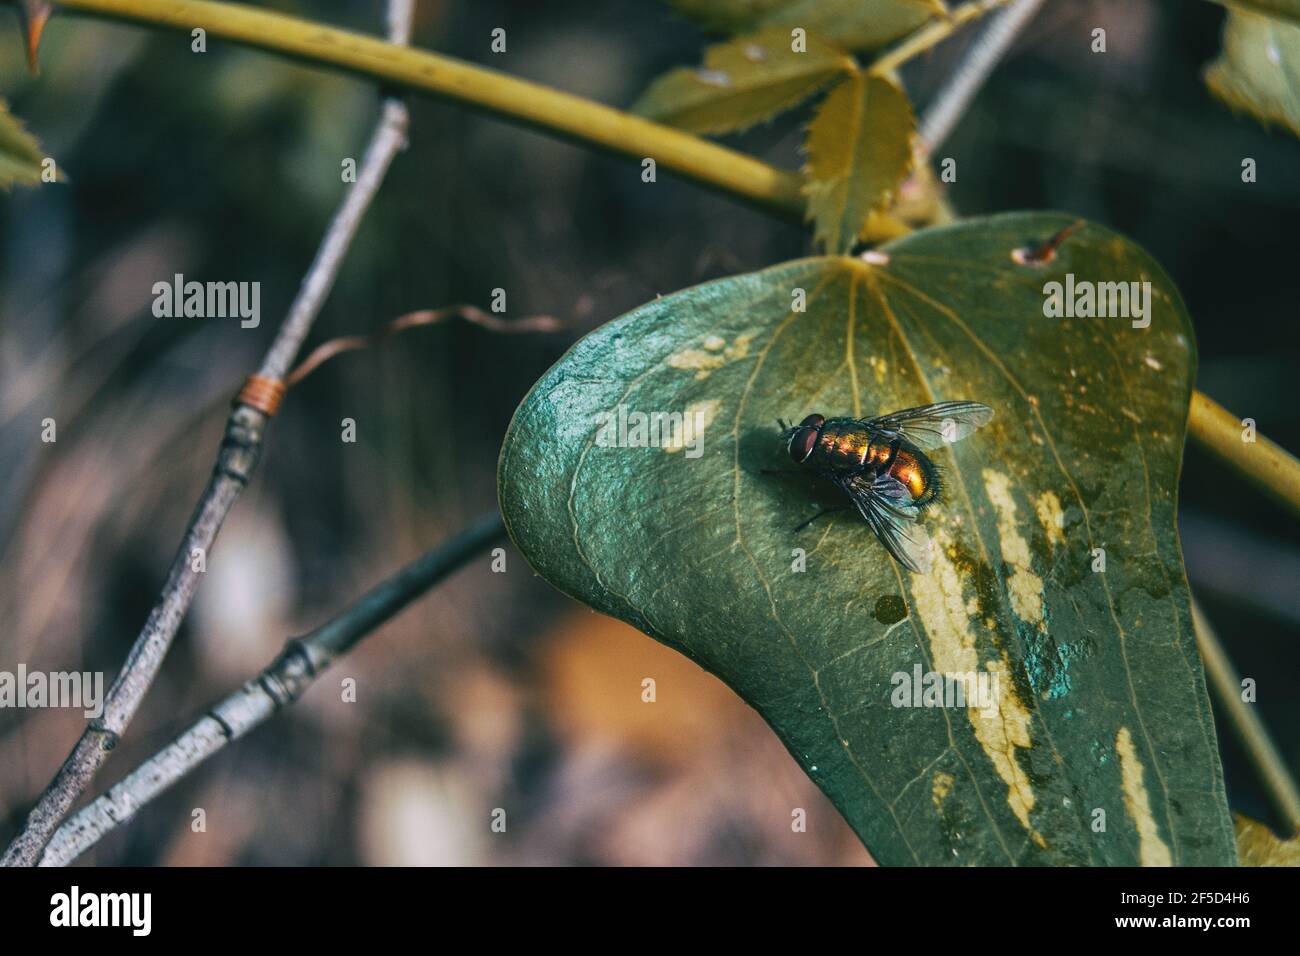 leave close up view of a smilax aspera with a fly on top Stock Photo